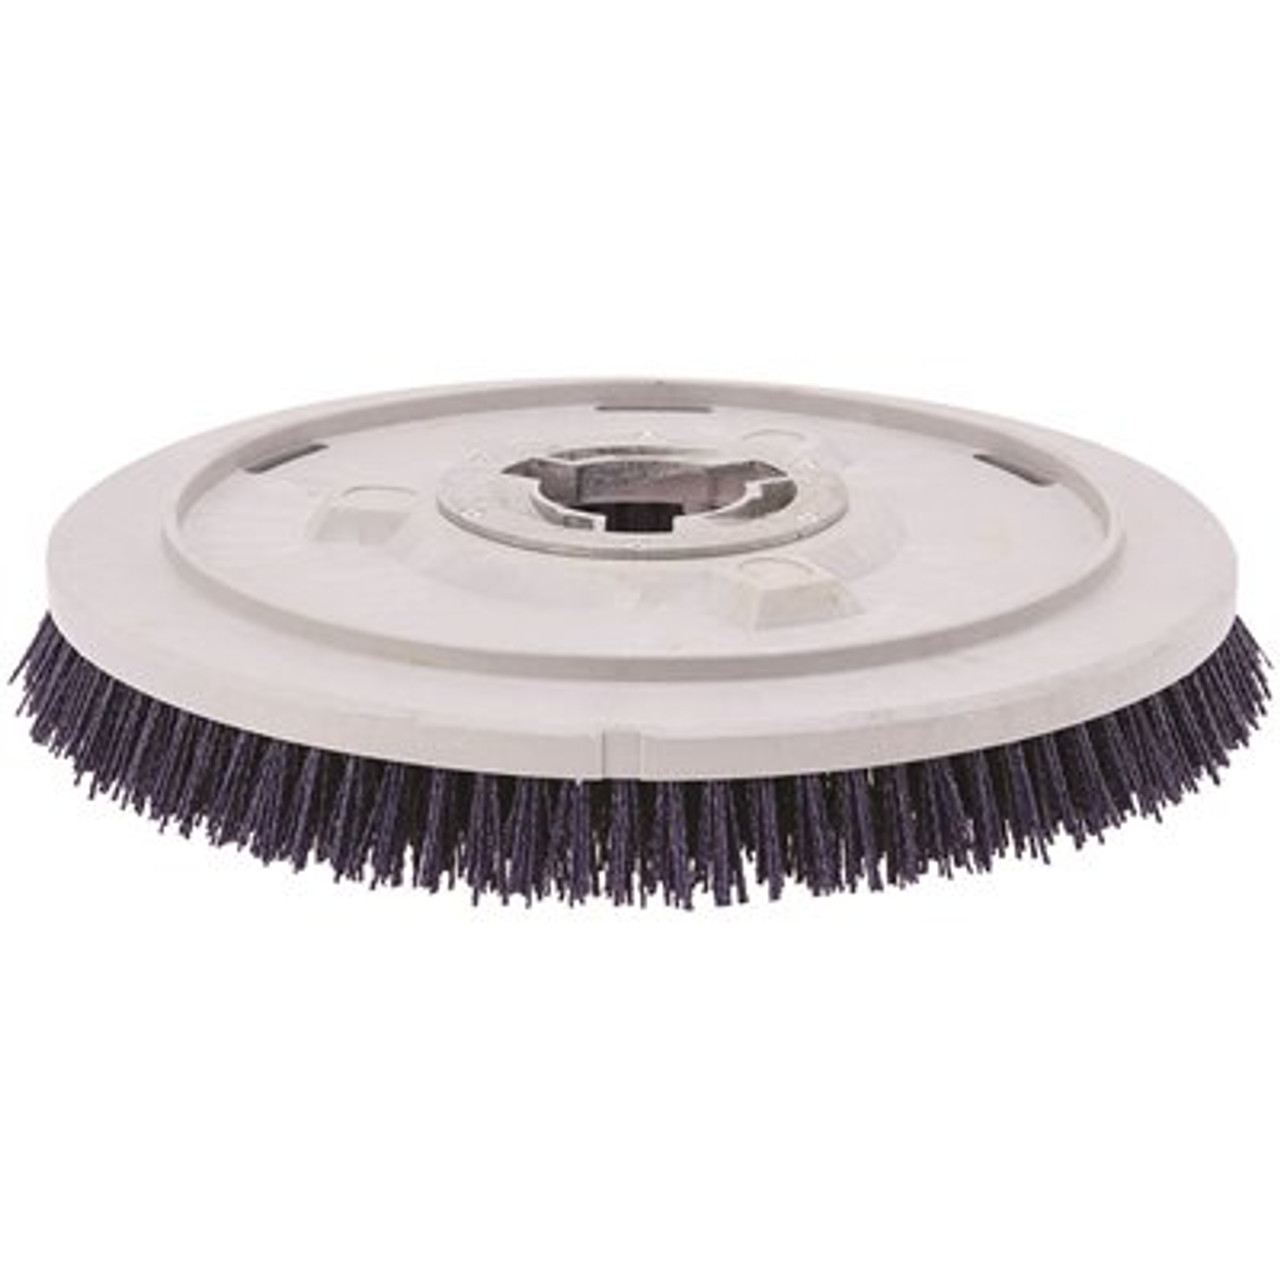 Tennant 20 In. Fm20Ss/Ds Strata-Grit Scrub/Strip Brush For Hd Scrubbing And Stripping